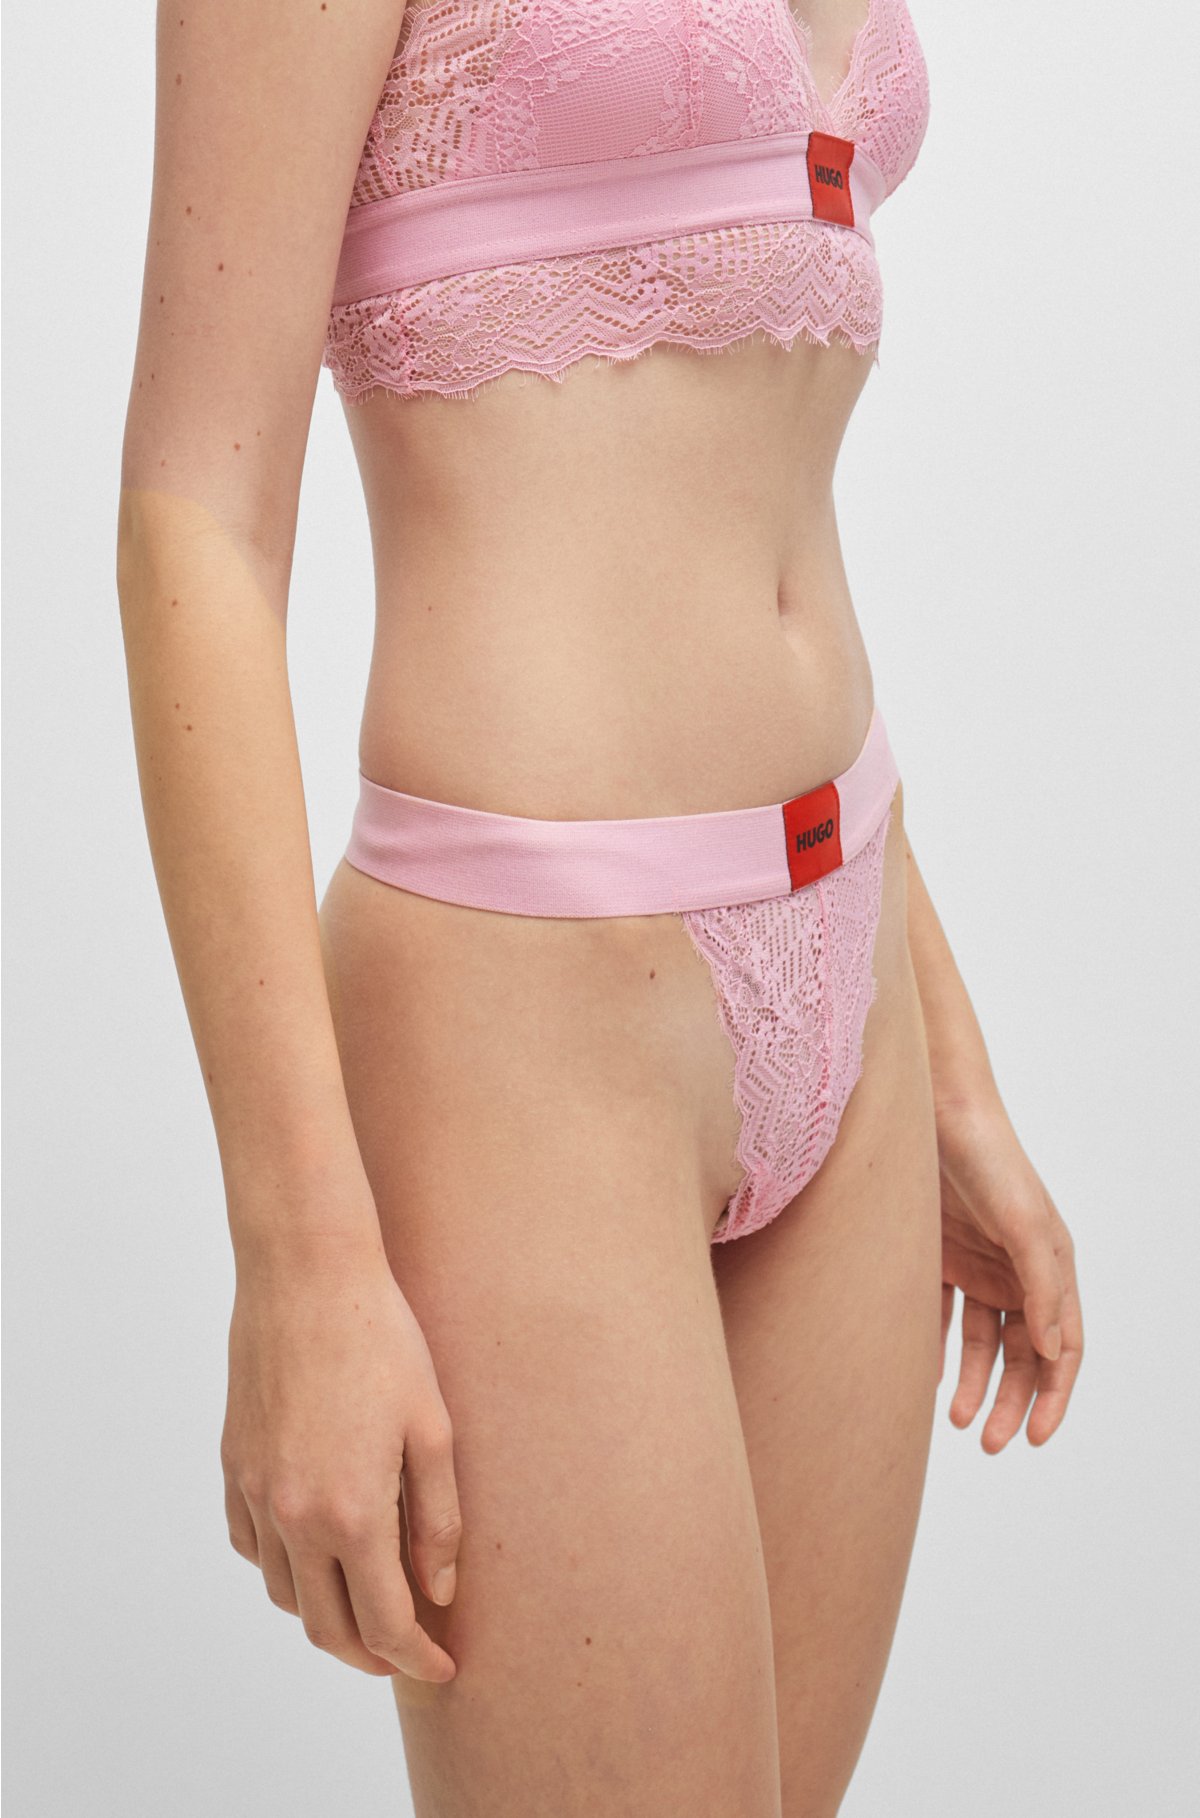 HUGO - Thong in geometric lace with red logo label